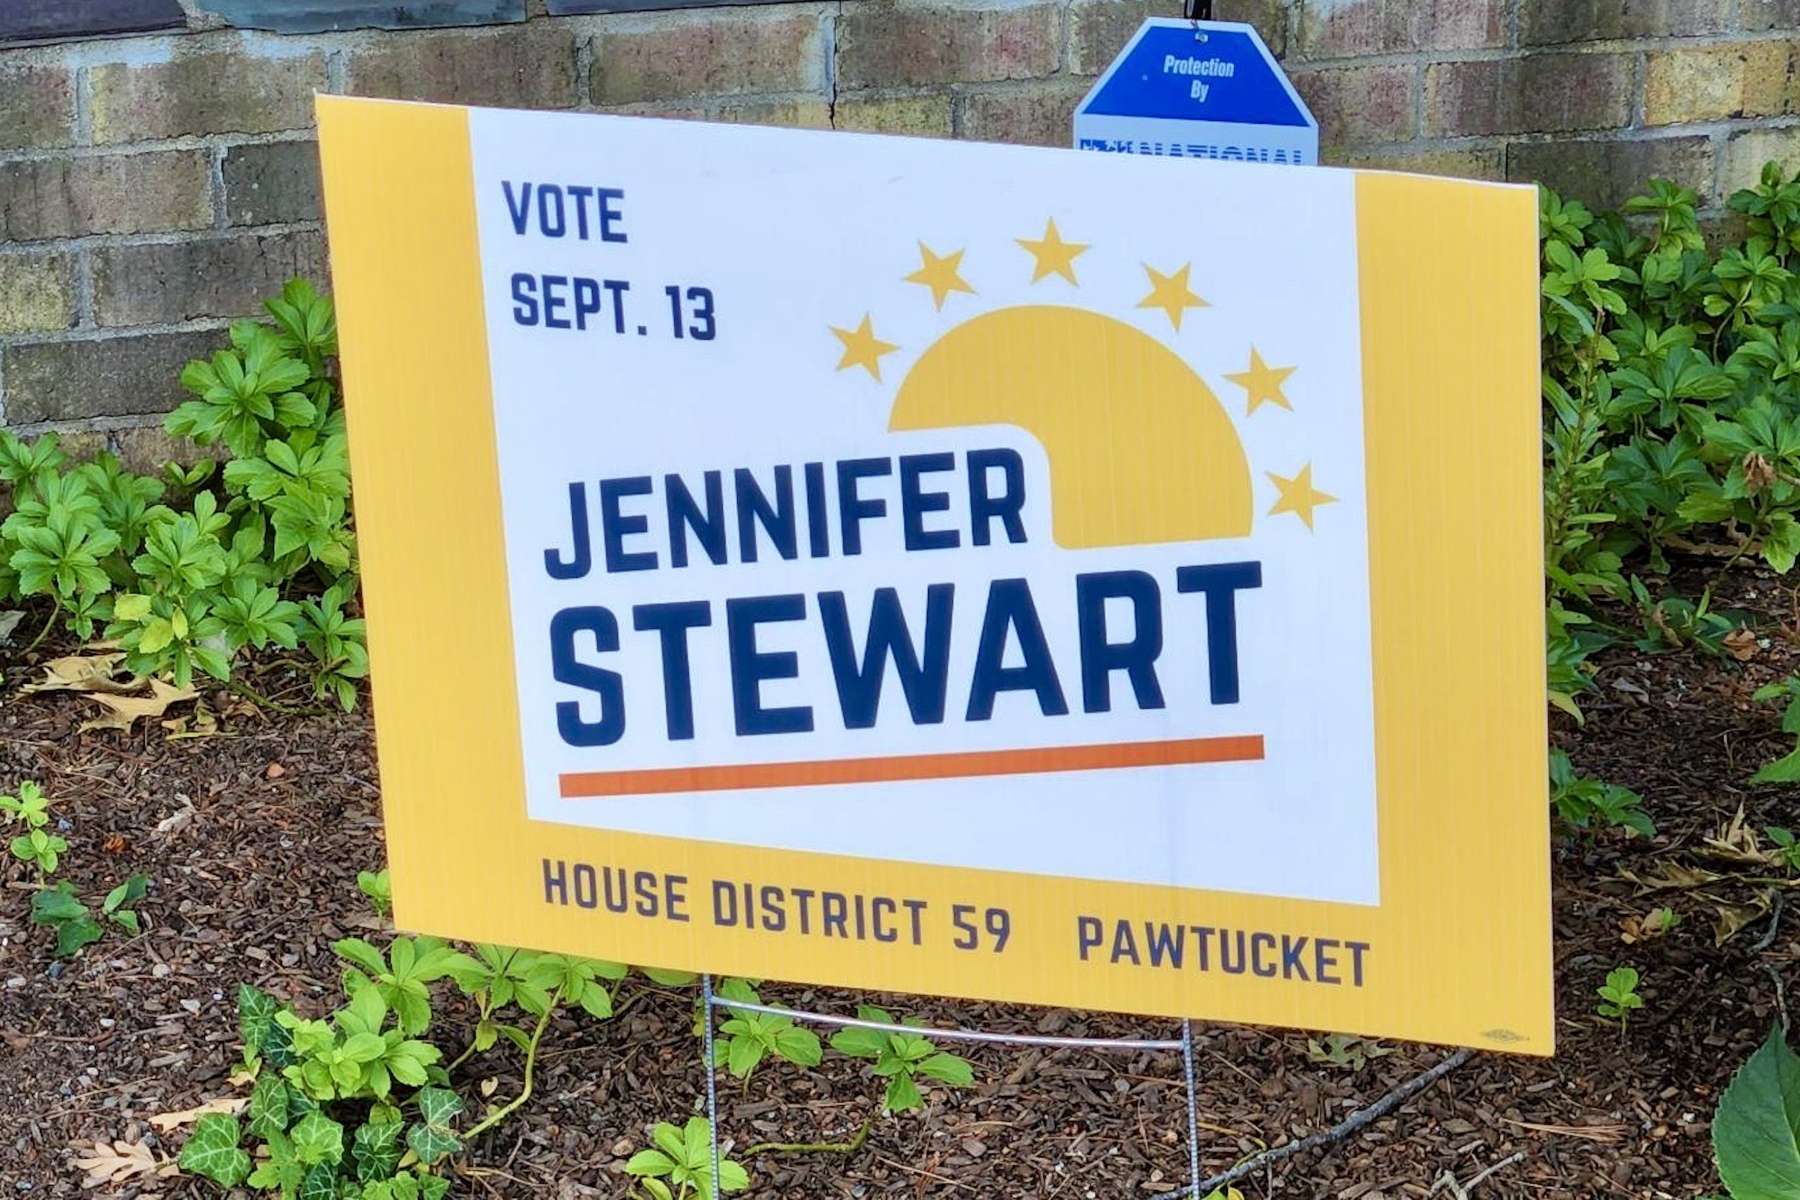 ACLU takes Pawtucket to federal court over unconstitutional political lawn sign ordinance